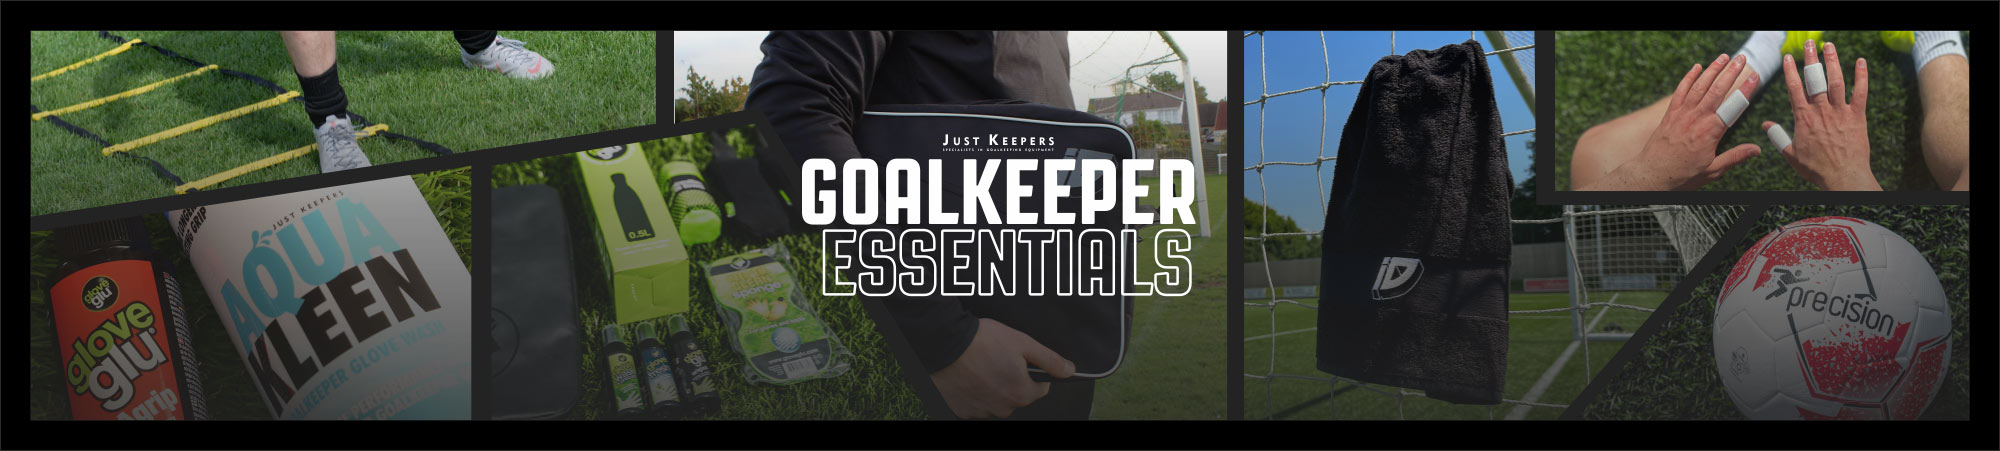 Just Keepers Goalkeeper accessories for matchday and training